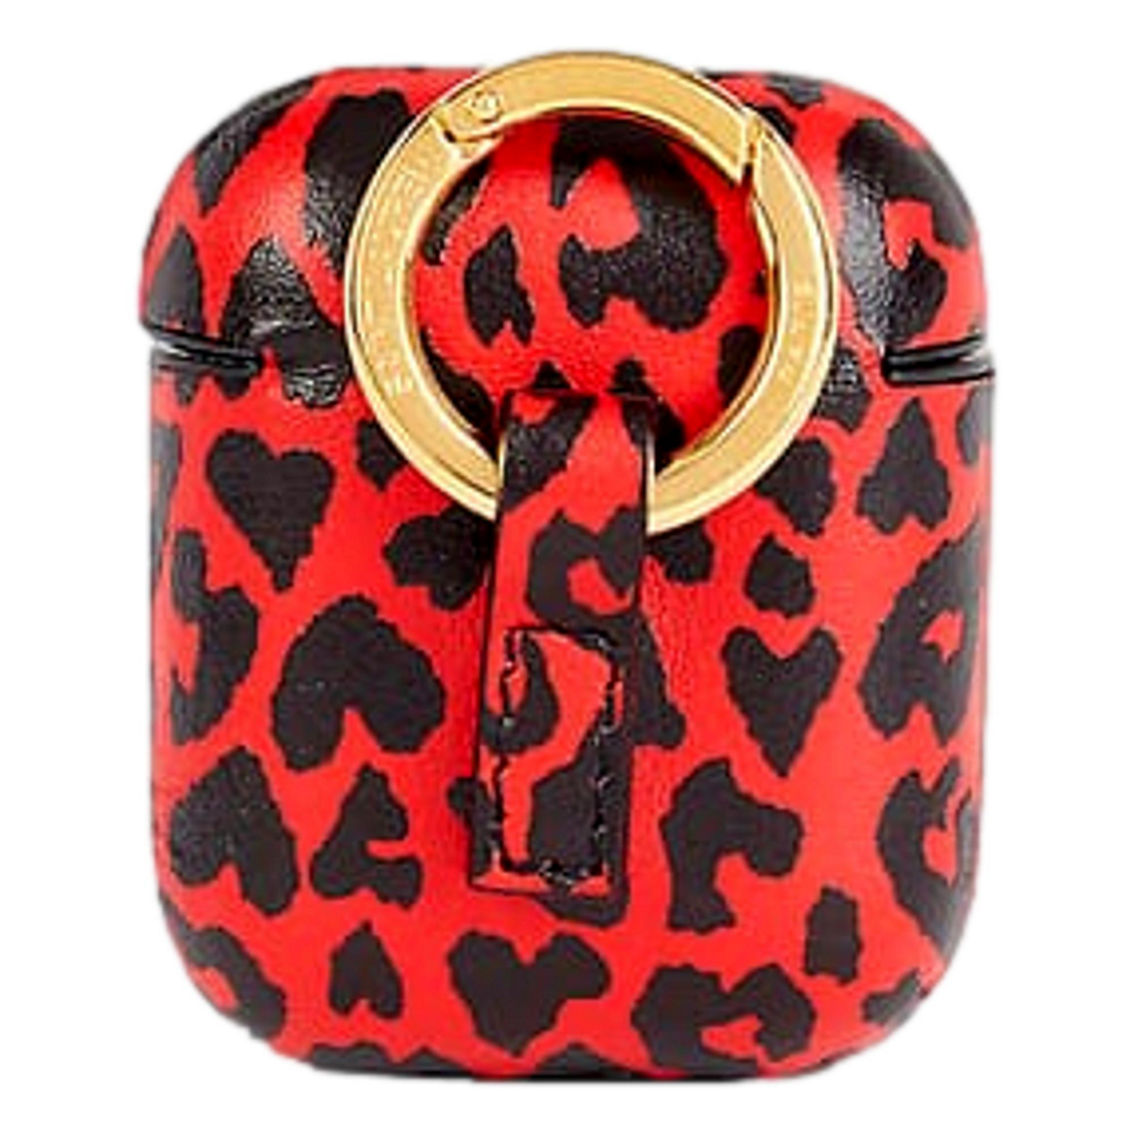 Saint Laurent Leopard Print Black and Red Leather Airpods Case (New) - Image 5 of 5